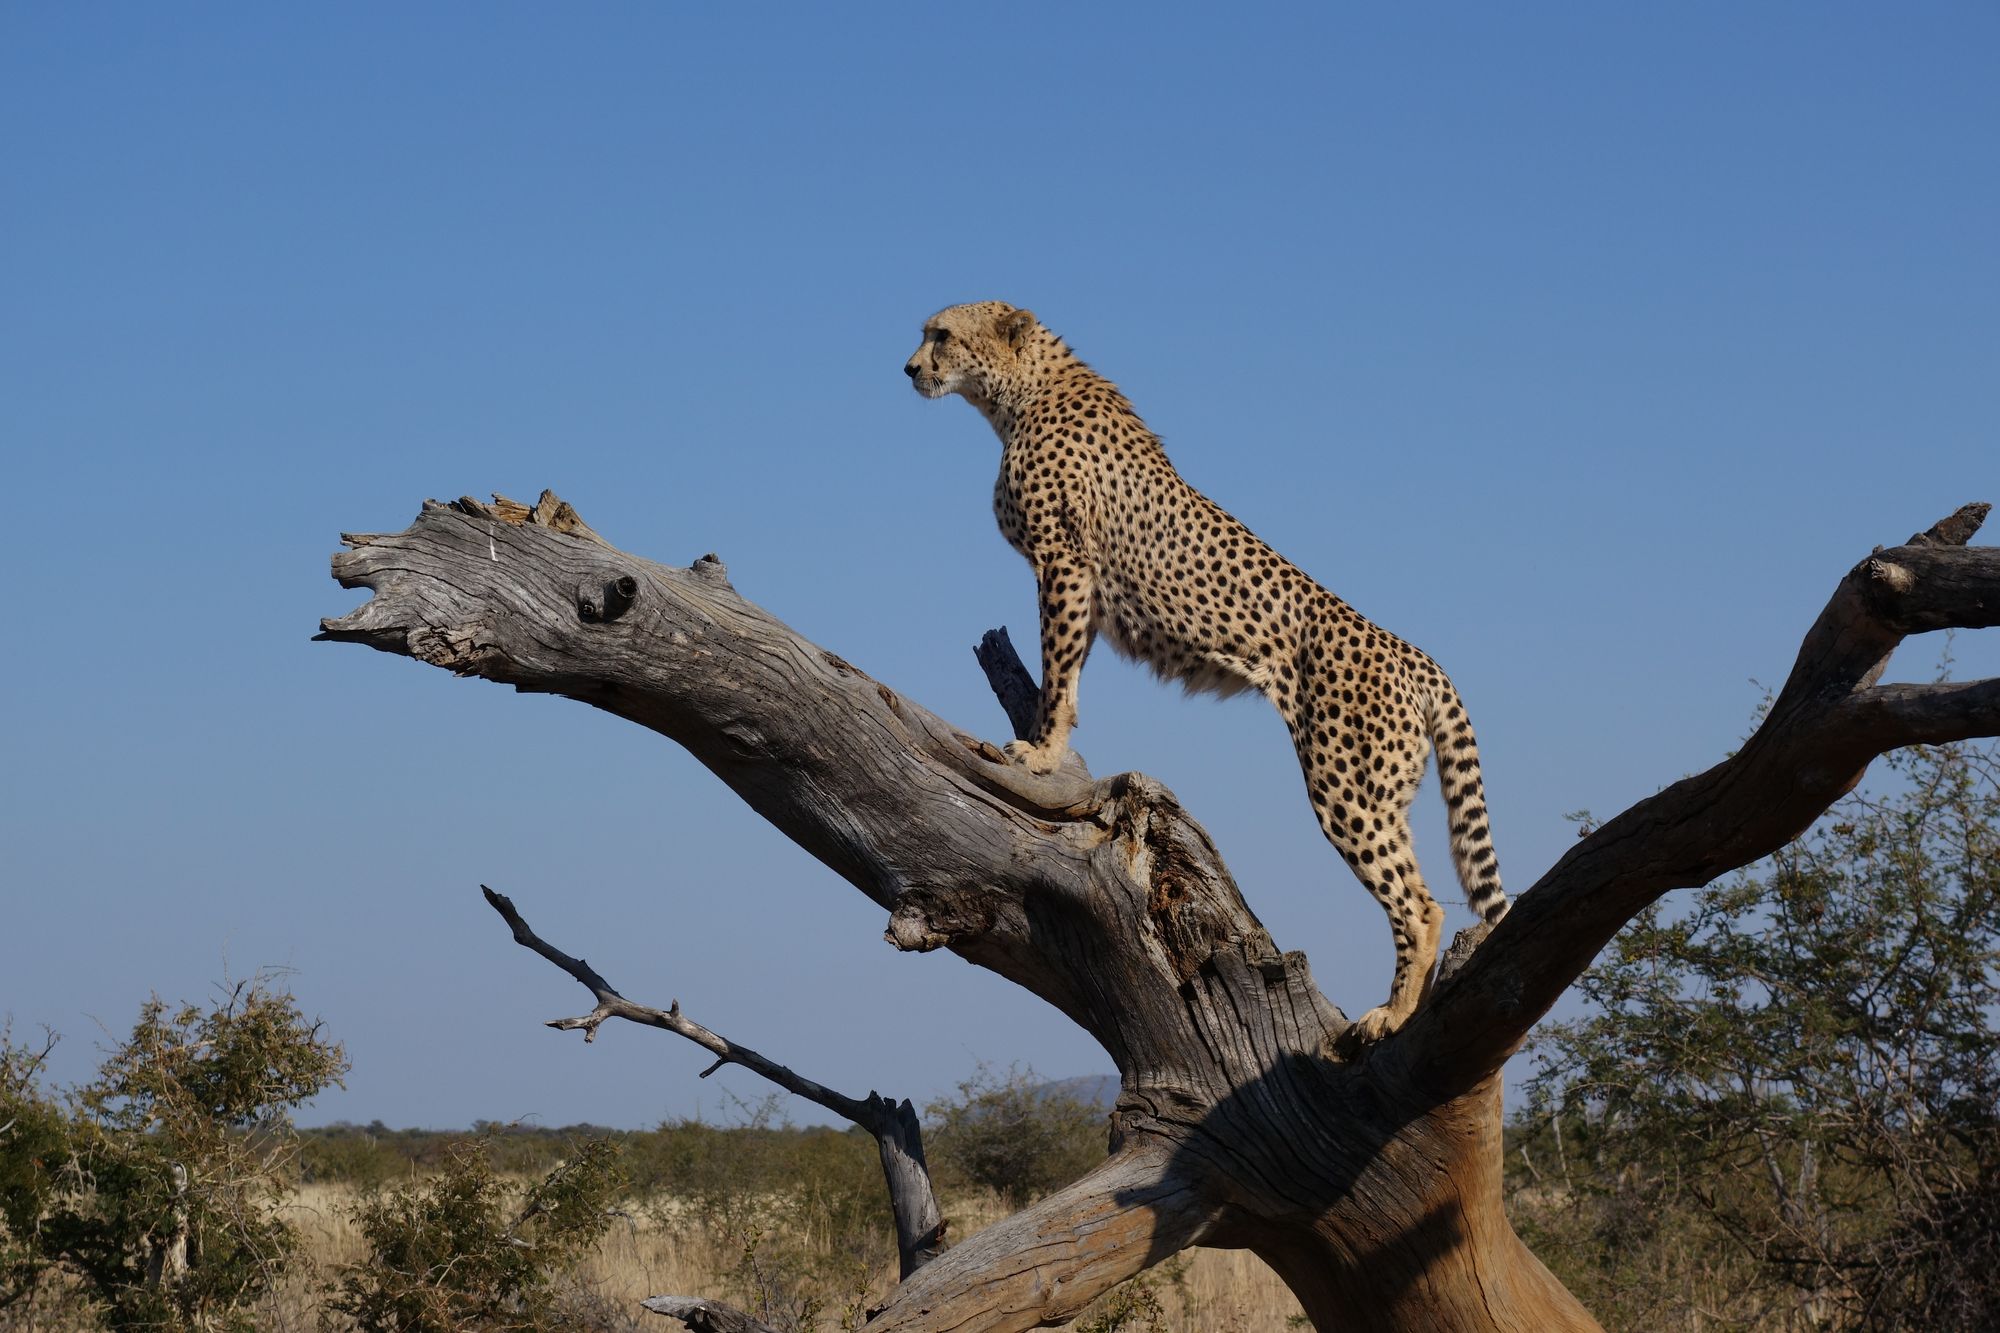 A cheetah perched on a tree trunk